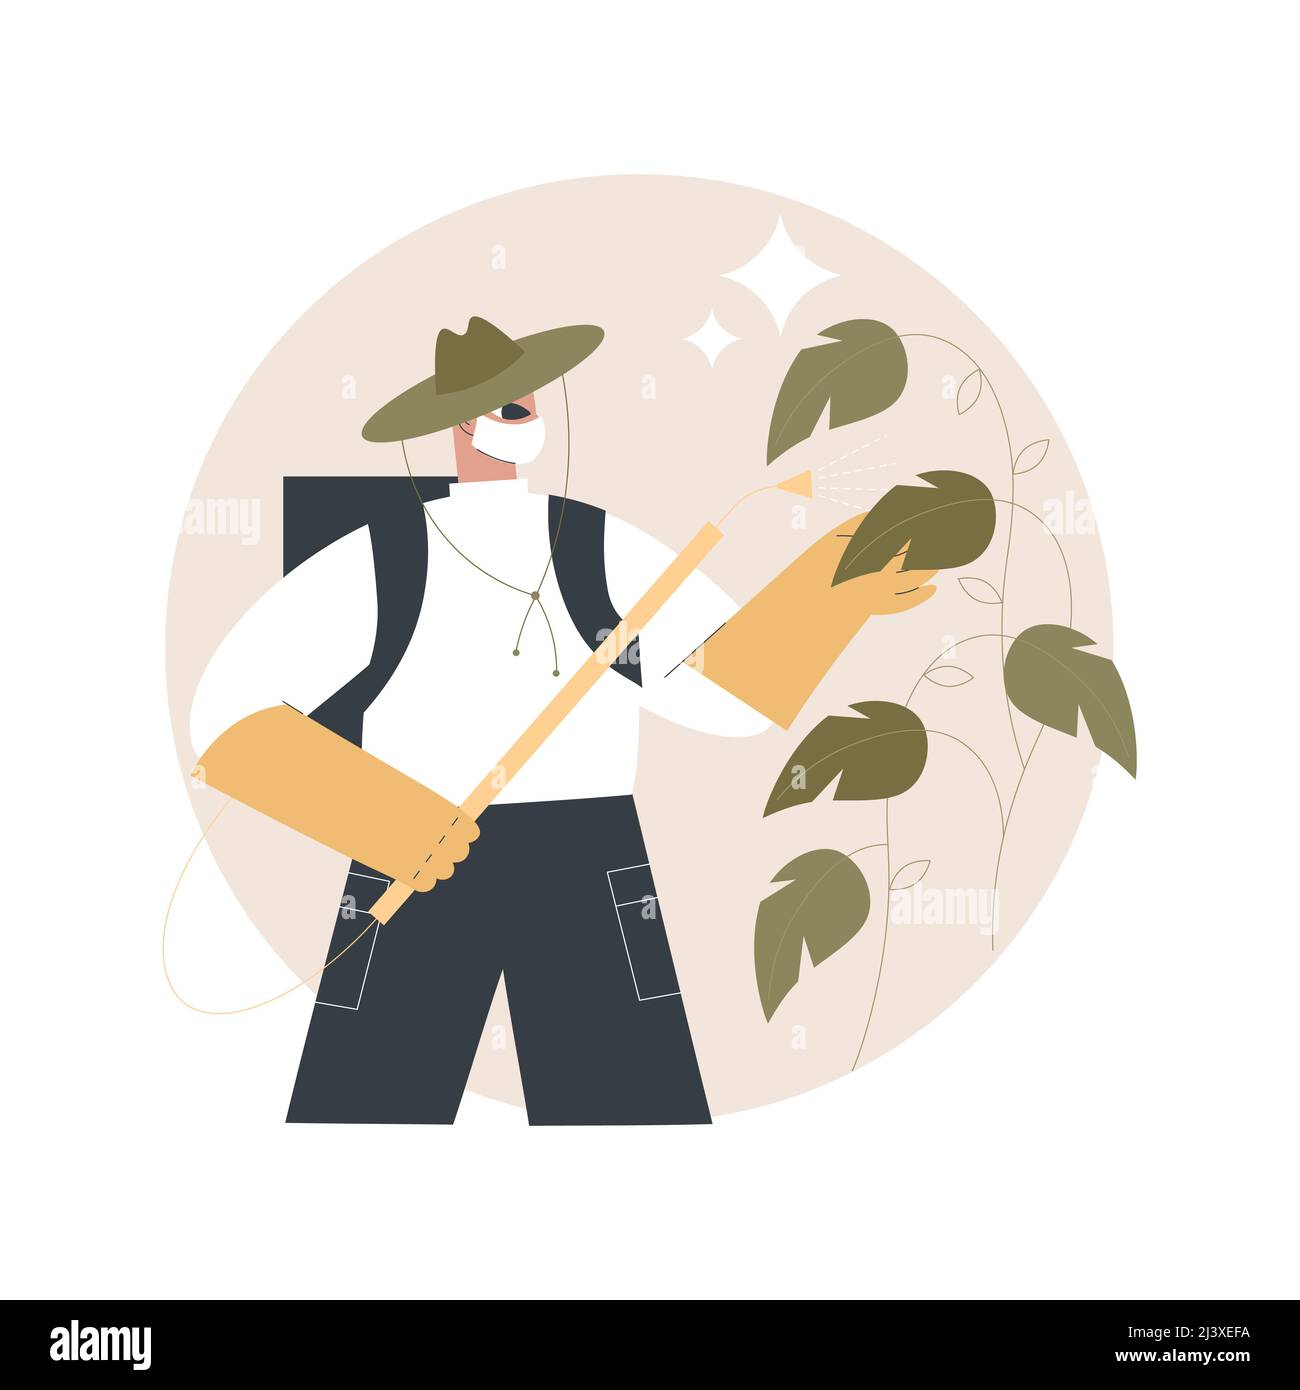 Weed control abstract concept vector illustration. Gardening maintenance, pest control, spray chemicals, weed killer, lawn care service, herbicide and Stock Vector